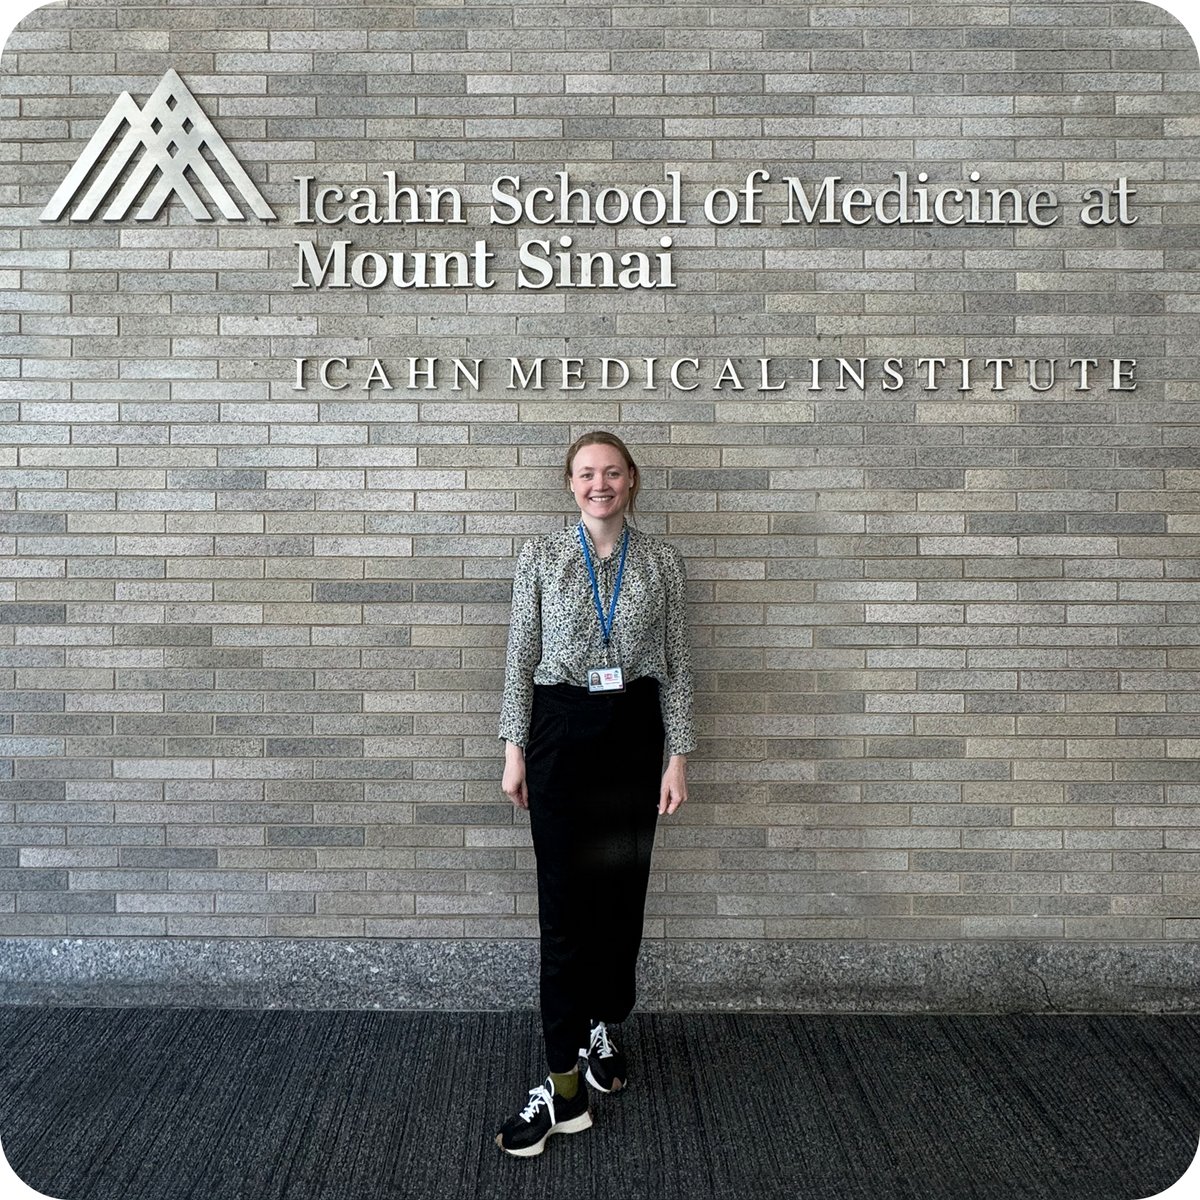 PHD STUDENT VISITING NYC 🗽 @BonfilsLinea is currently a visiting researcher at @IcahnMountSinai. She works with data from the unique MECONIUM cohort. A big thank you to @ManasiAgrawalMD, @JeanFredericCo1, #IngaPeter, and all of Peter lab for welcoming this collaboration.